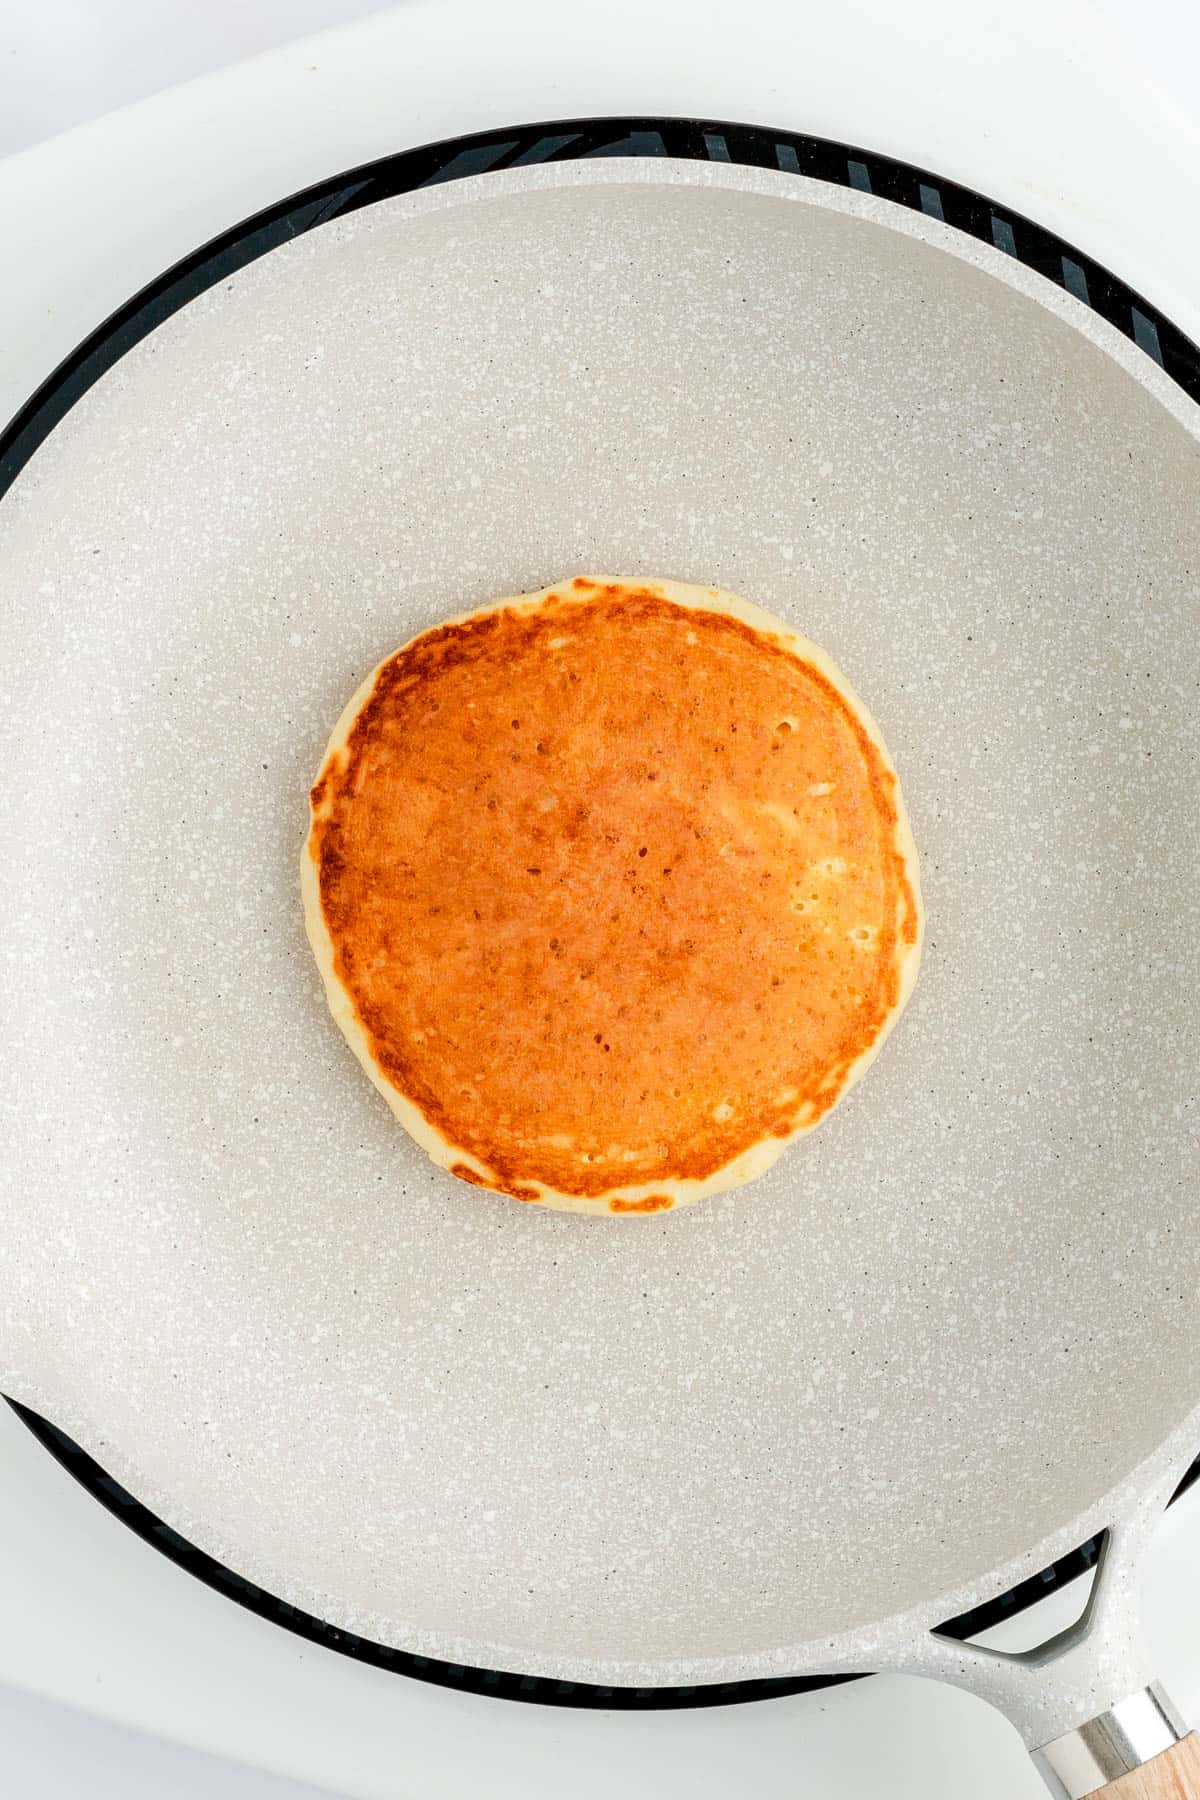 Flipped cooked golden-brown top of lemon pancake in gray pan on weight induction stove.